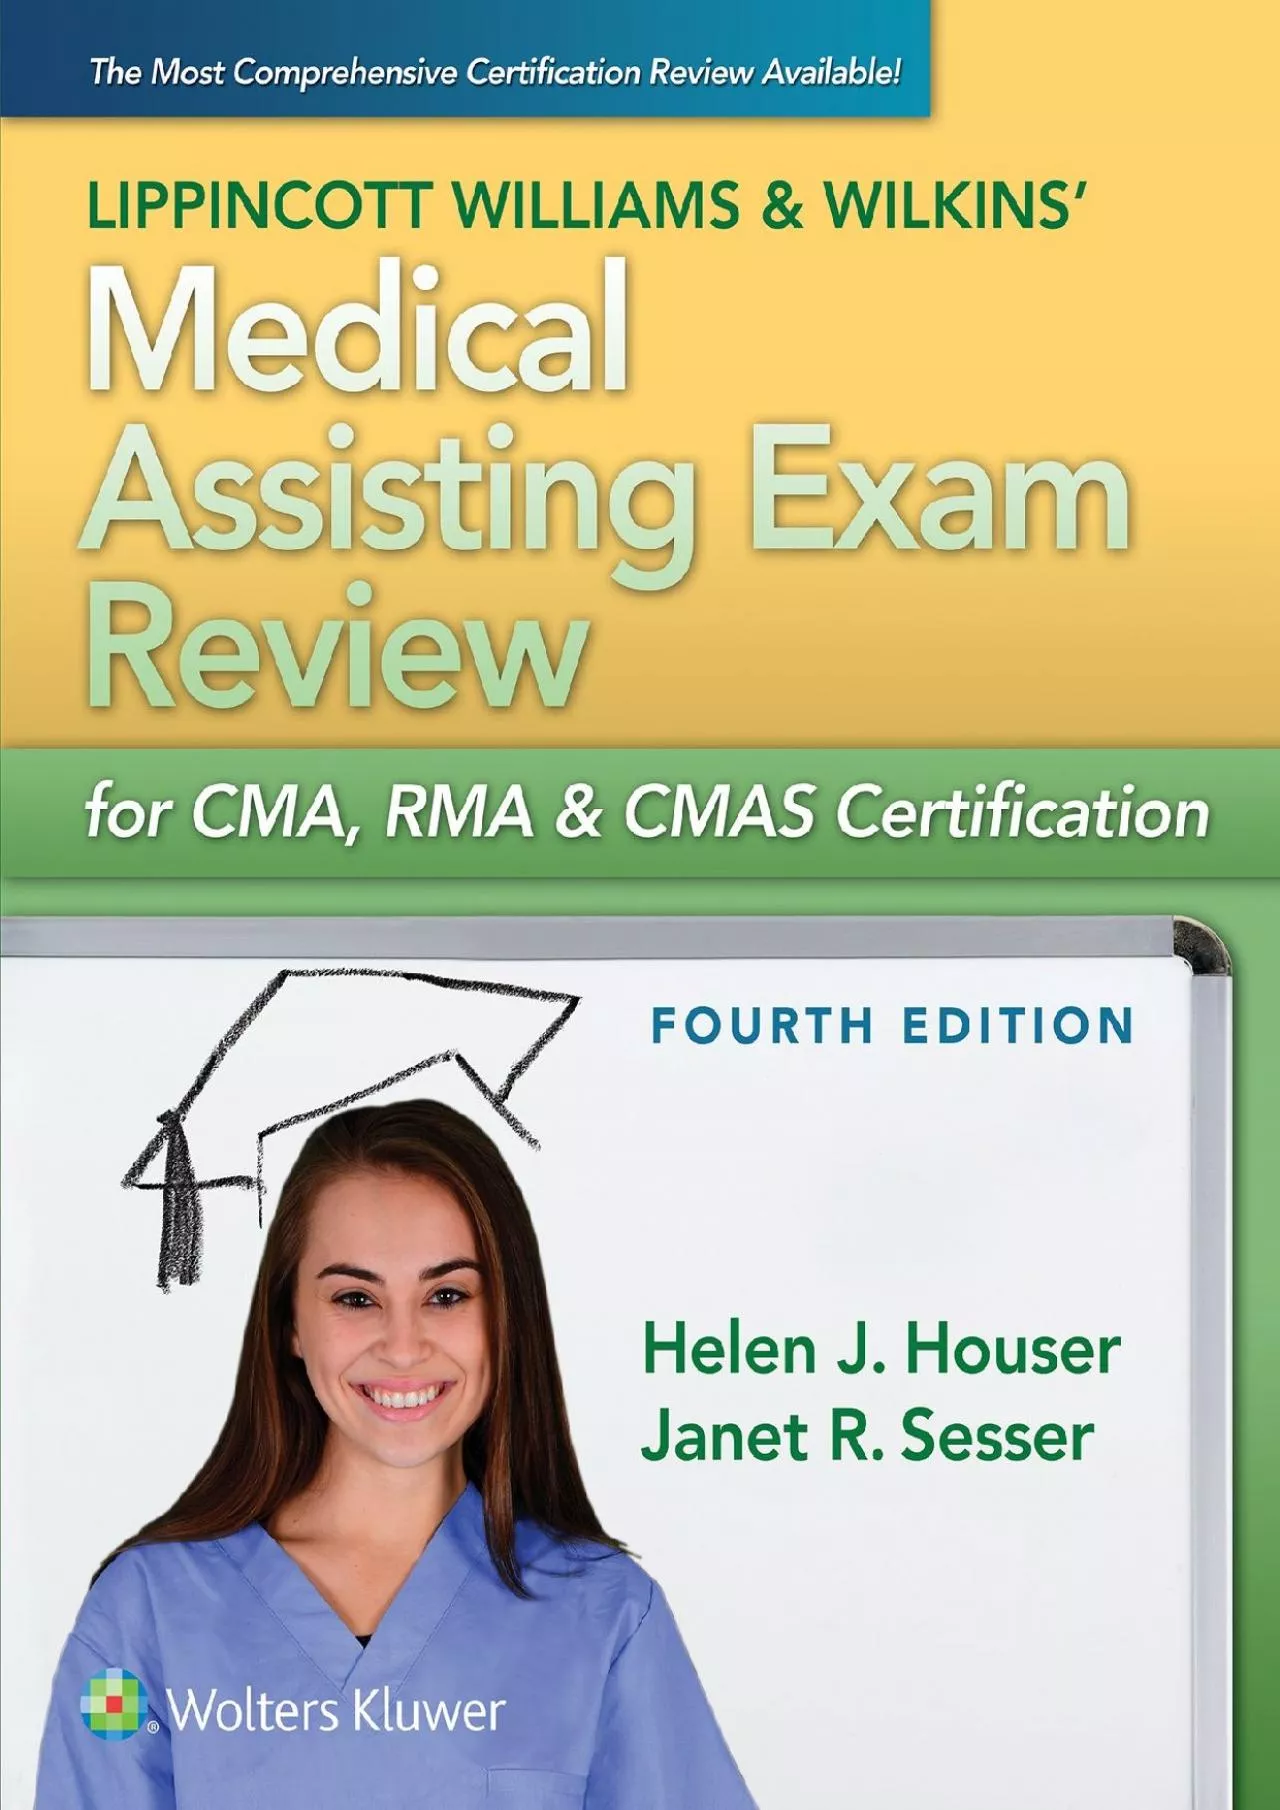 (READ)-Lippincott Williams & Wilkins Medical Assisting Exam Review for CMA, RMA & CMAS